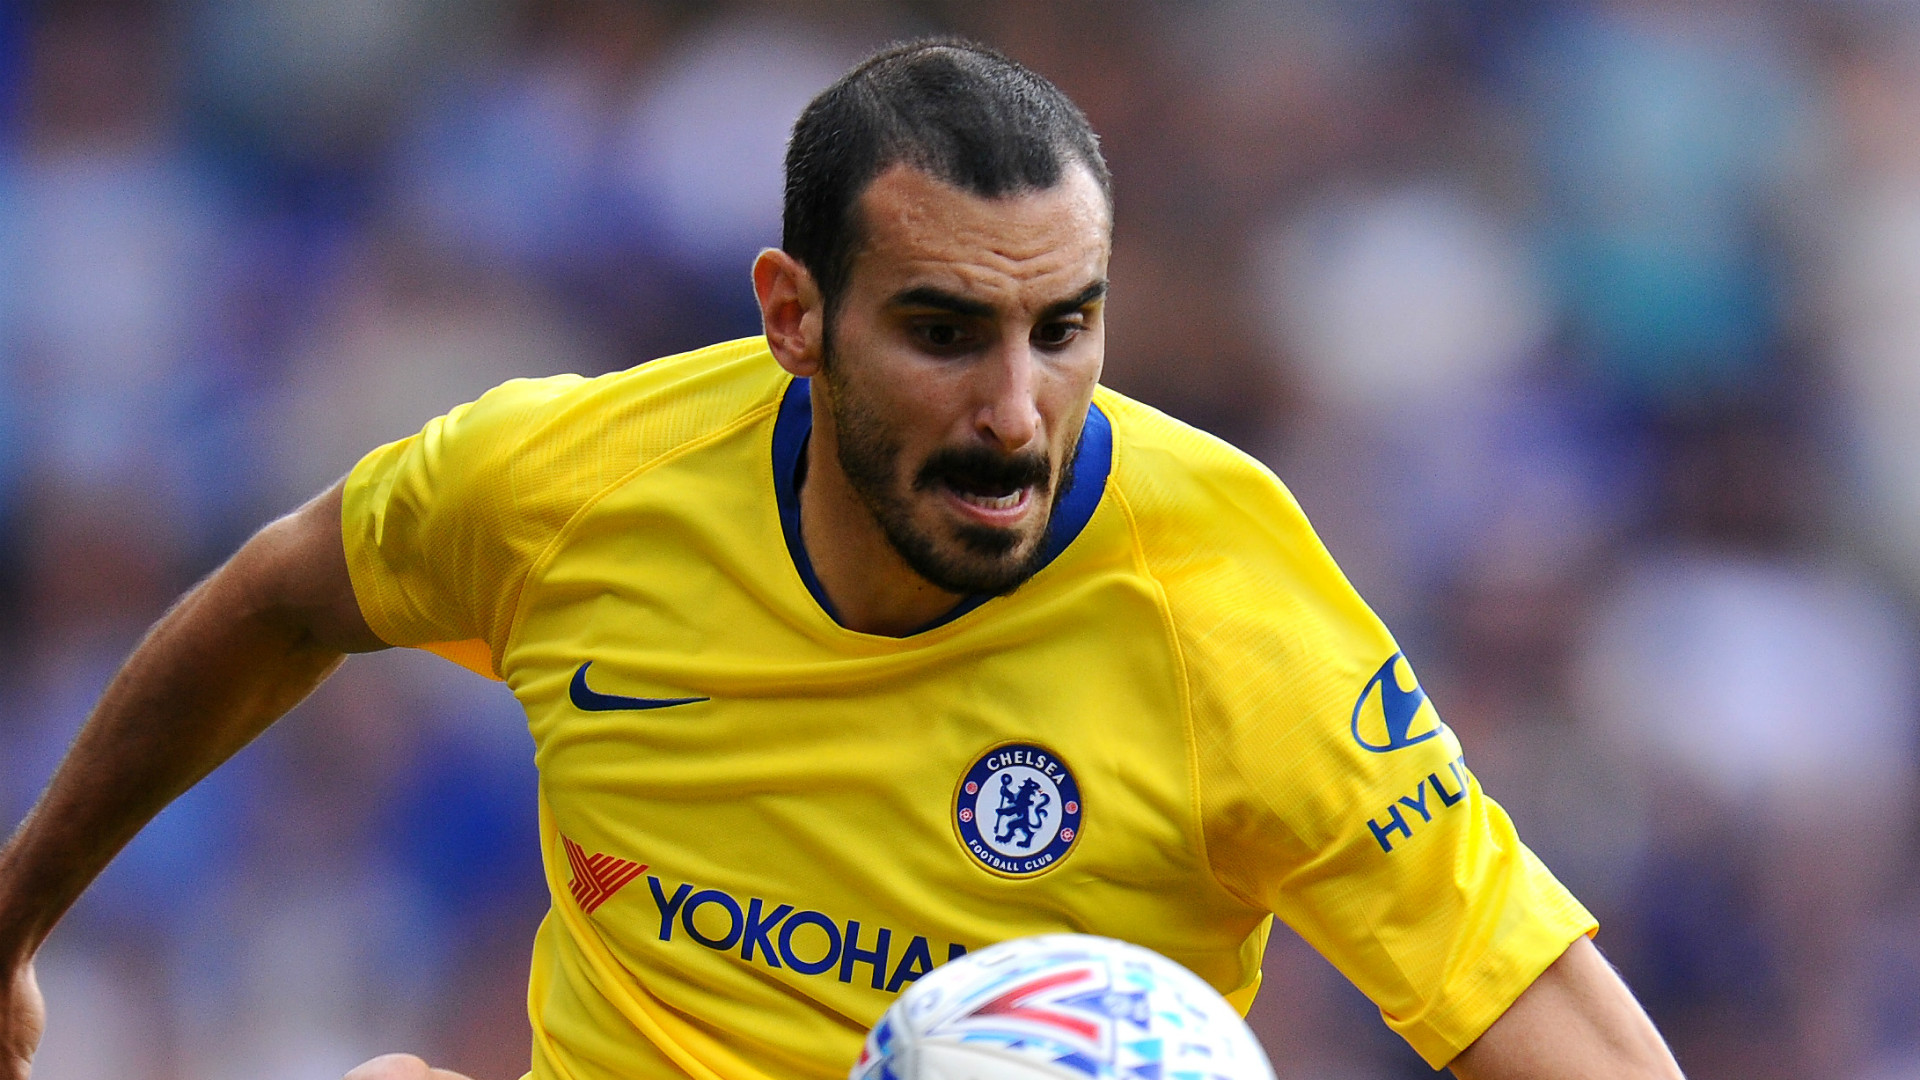 Chelsea defender, Zappacosta joins Roma on loan